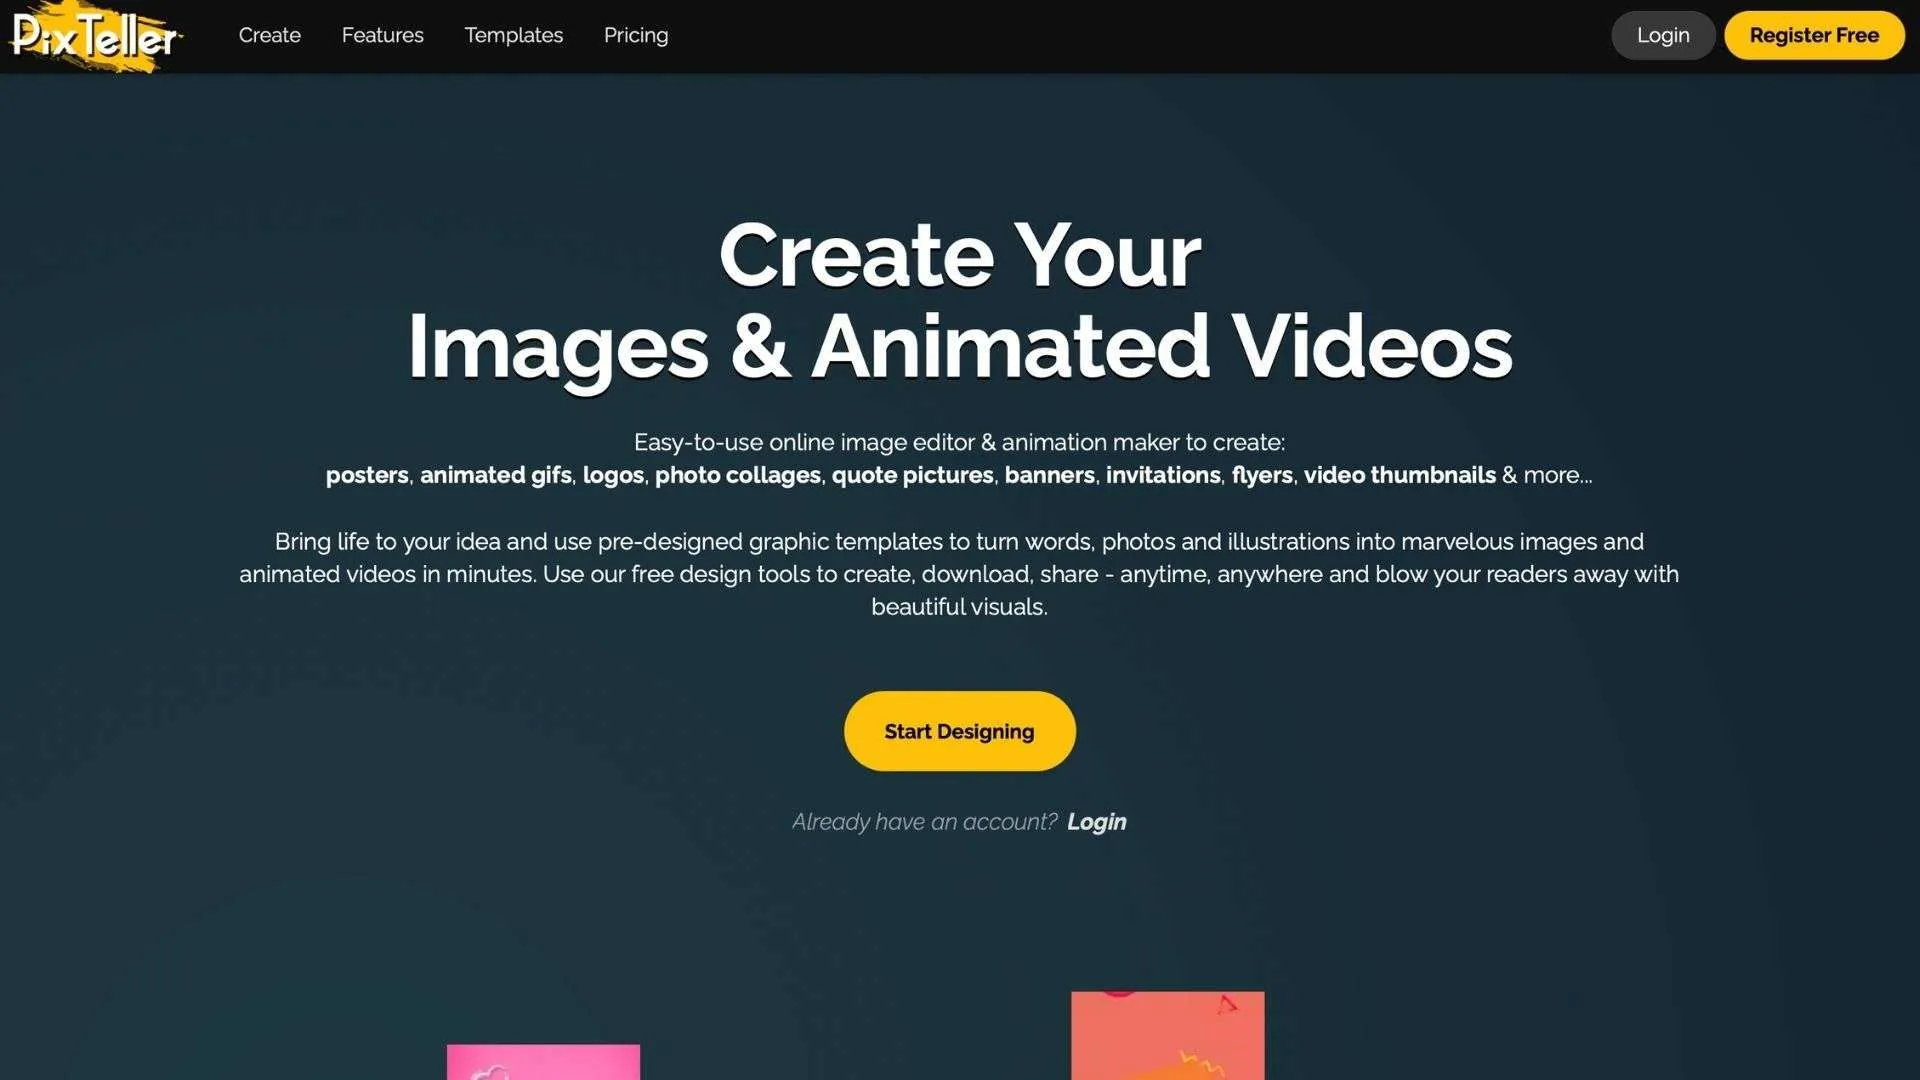 Tools for Animated Videos Pixteller